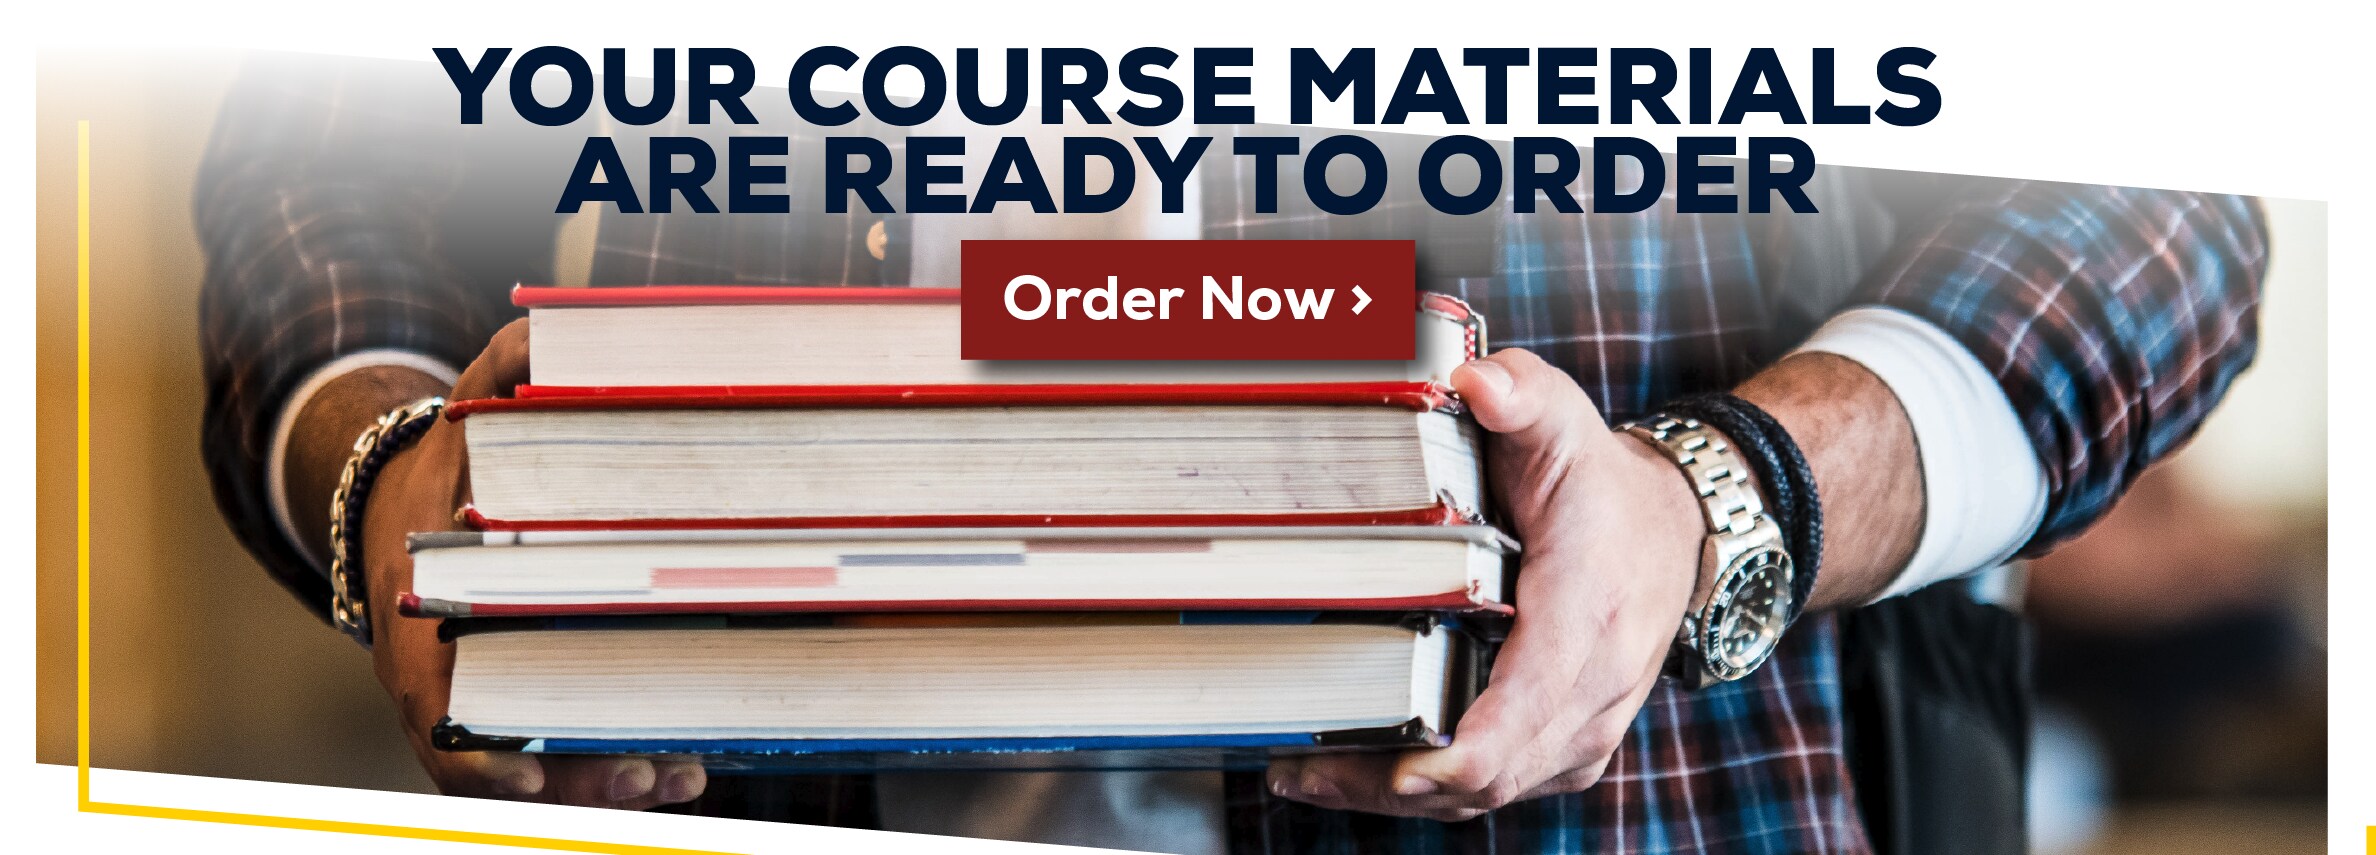 Your Course Materials are Ready to Order. Order Now. *Excludes marketplace purchases.